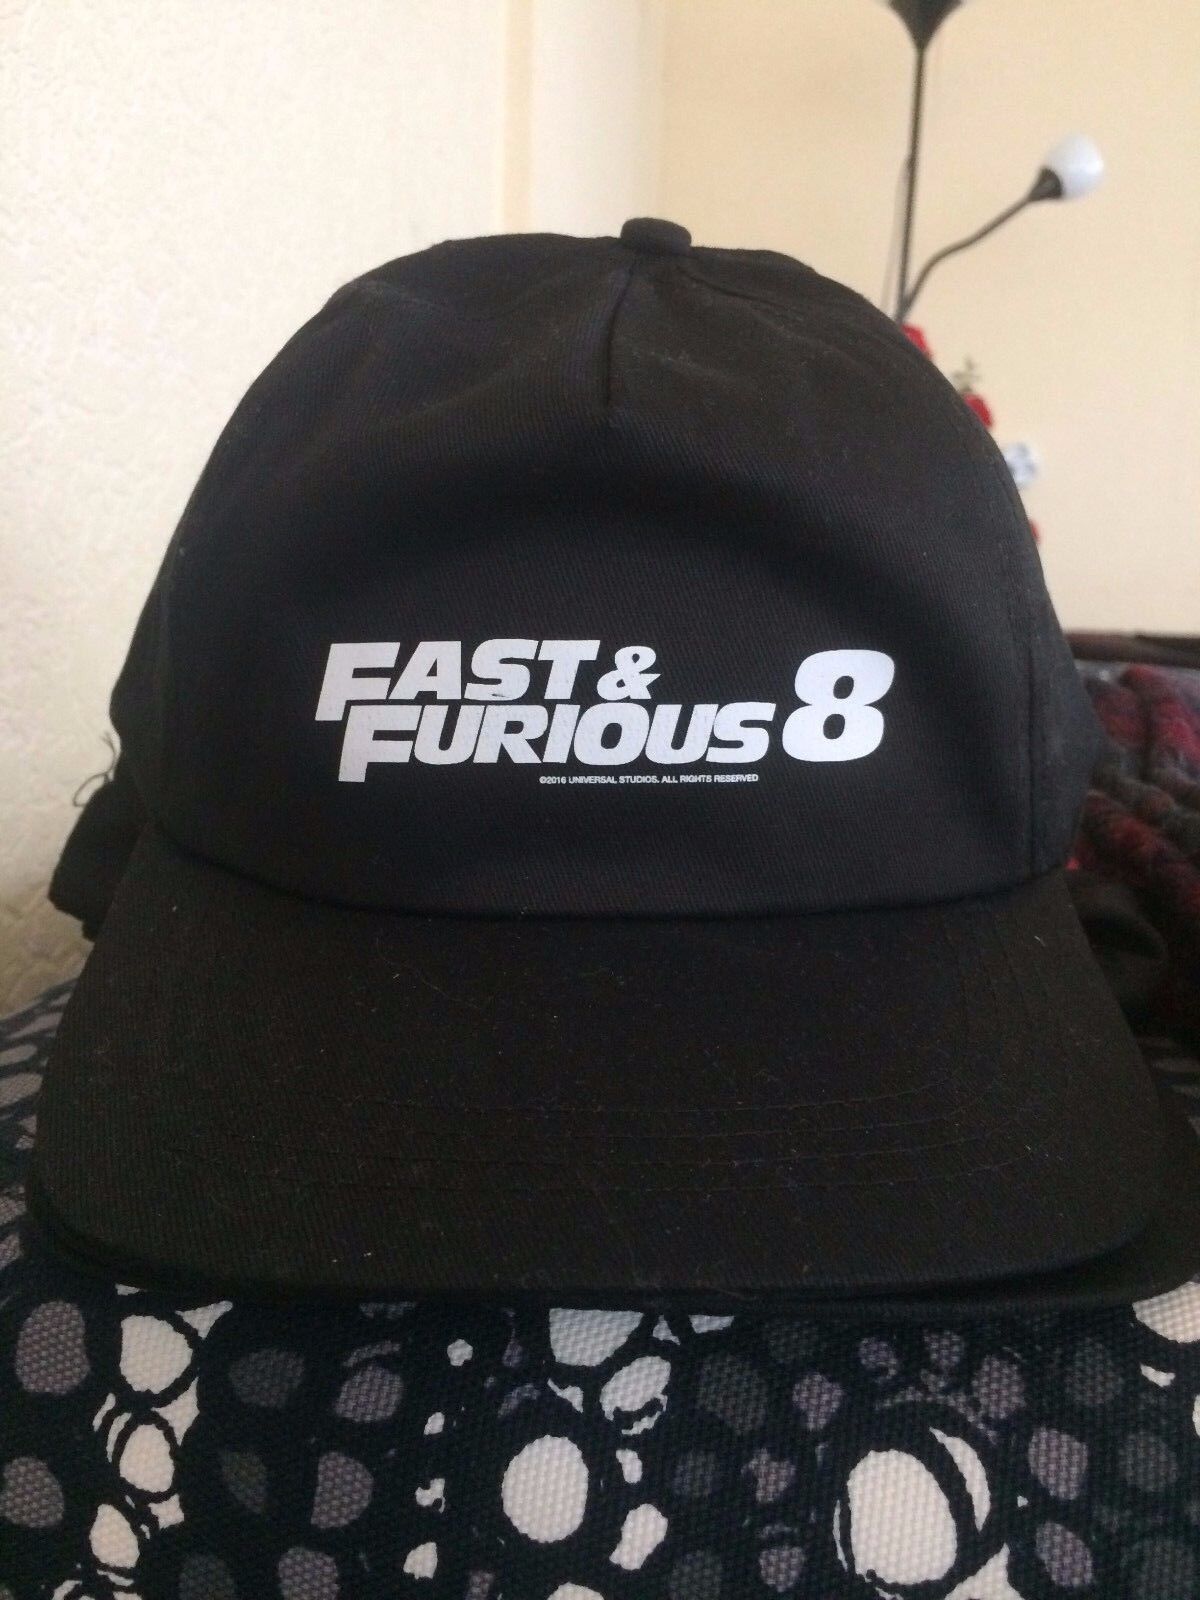 FAST & FURIOUS 8 Hat Cap OFFICIAL MOVIE PROMOTIONAL F1 Universal Studios 2017